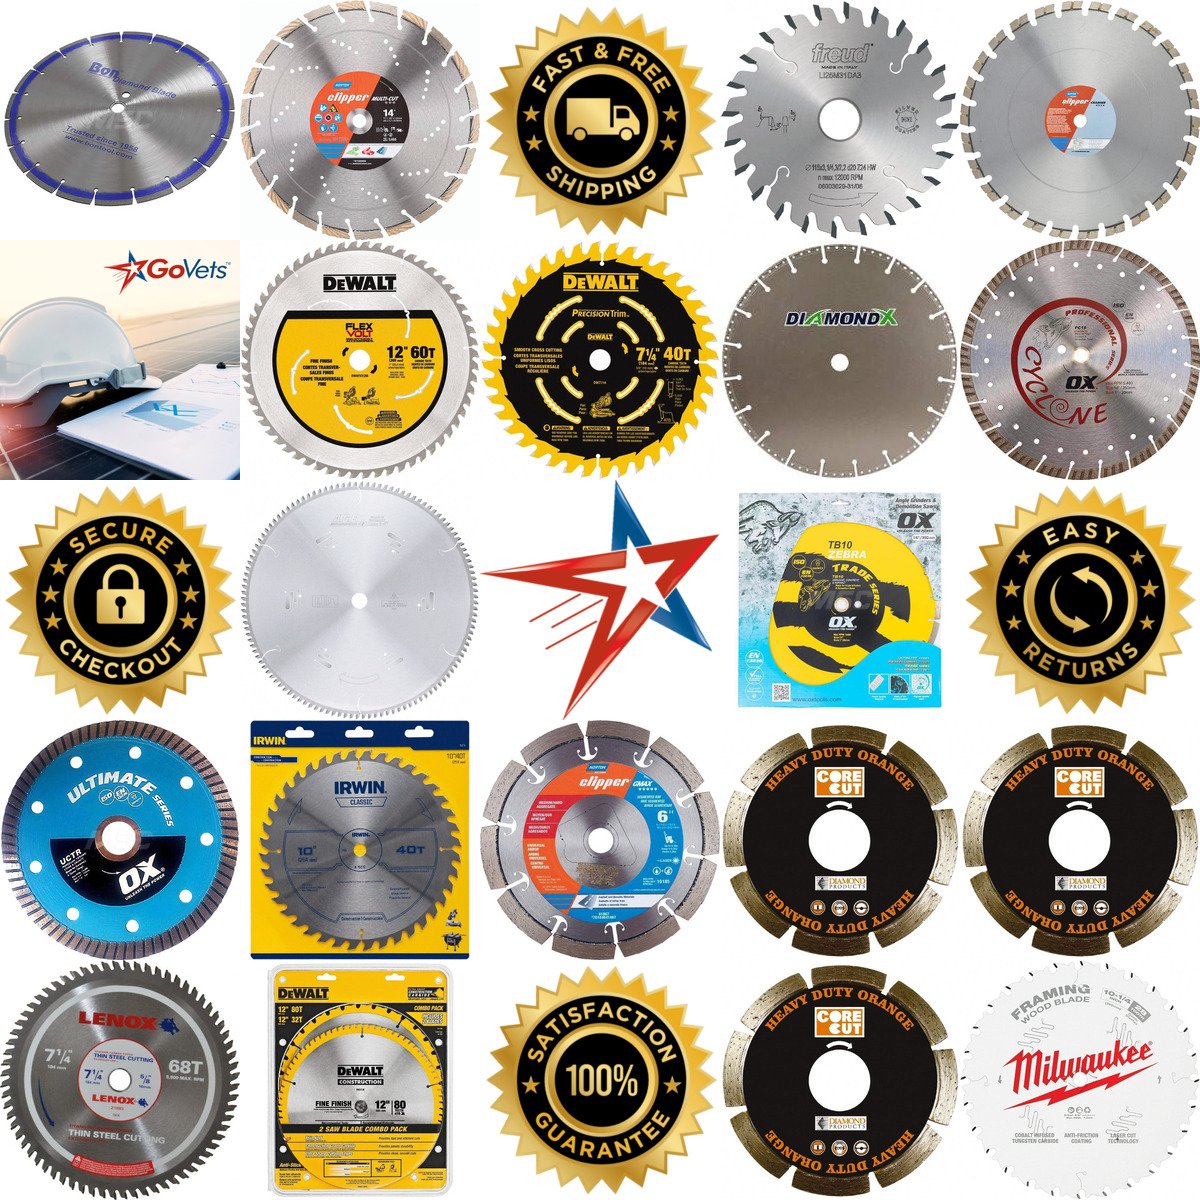 A selection of Wet and Dry Cut Saw Blades products on GoVets